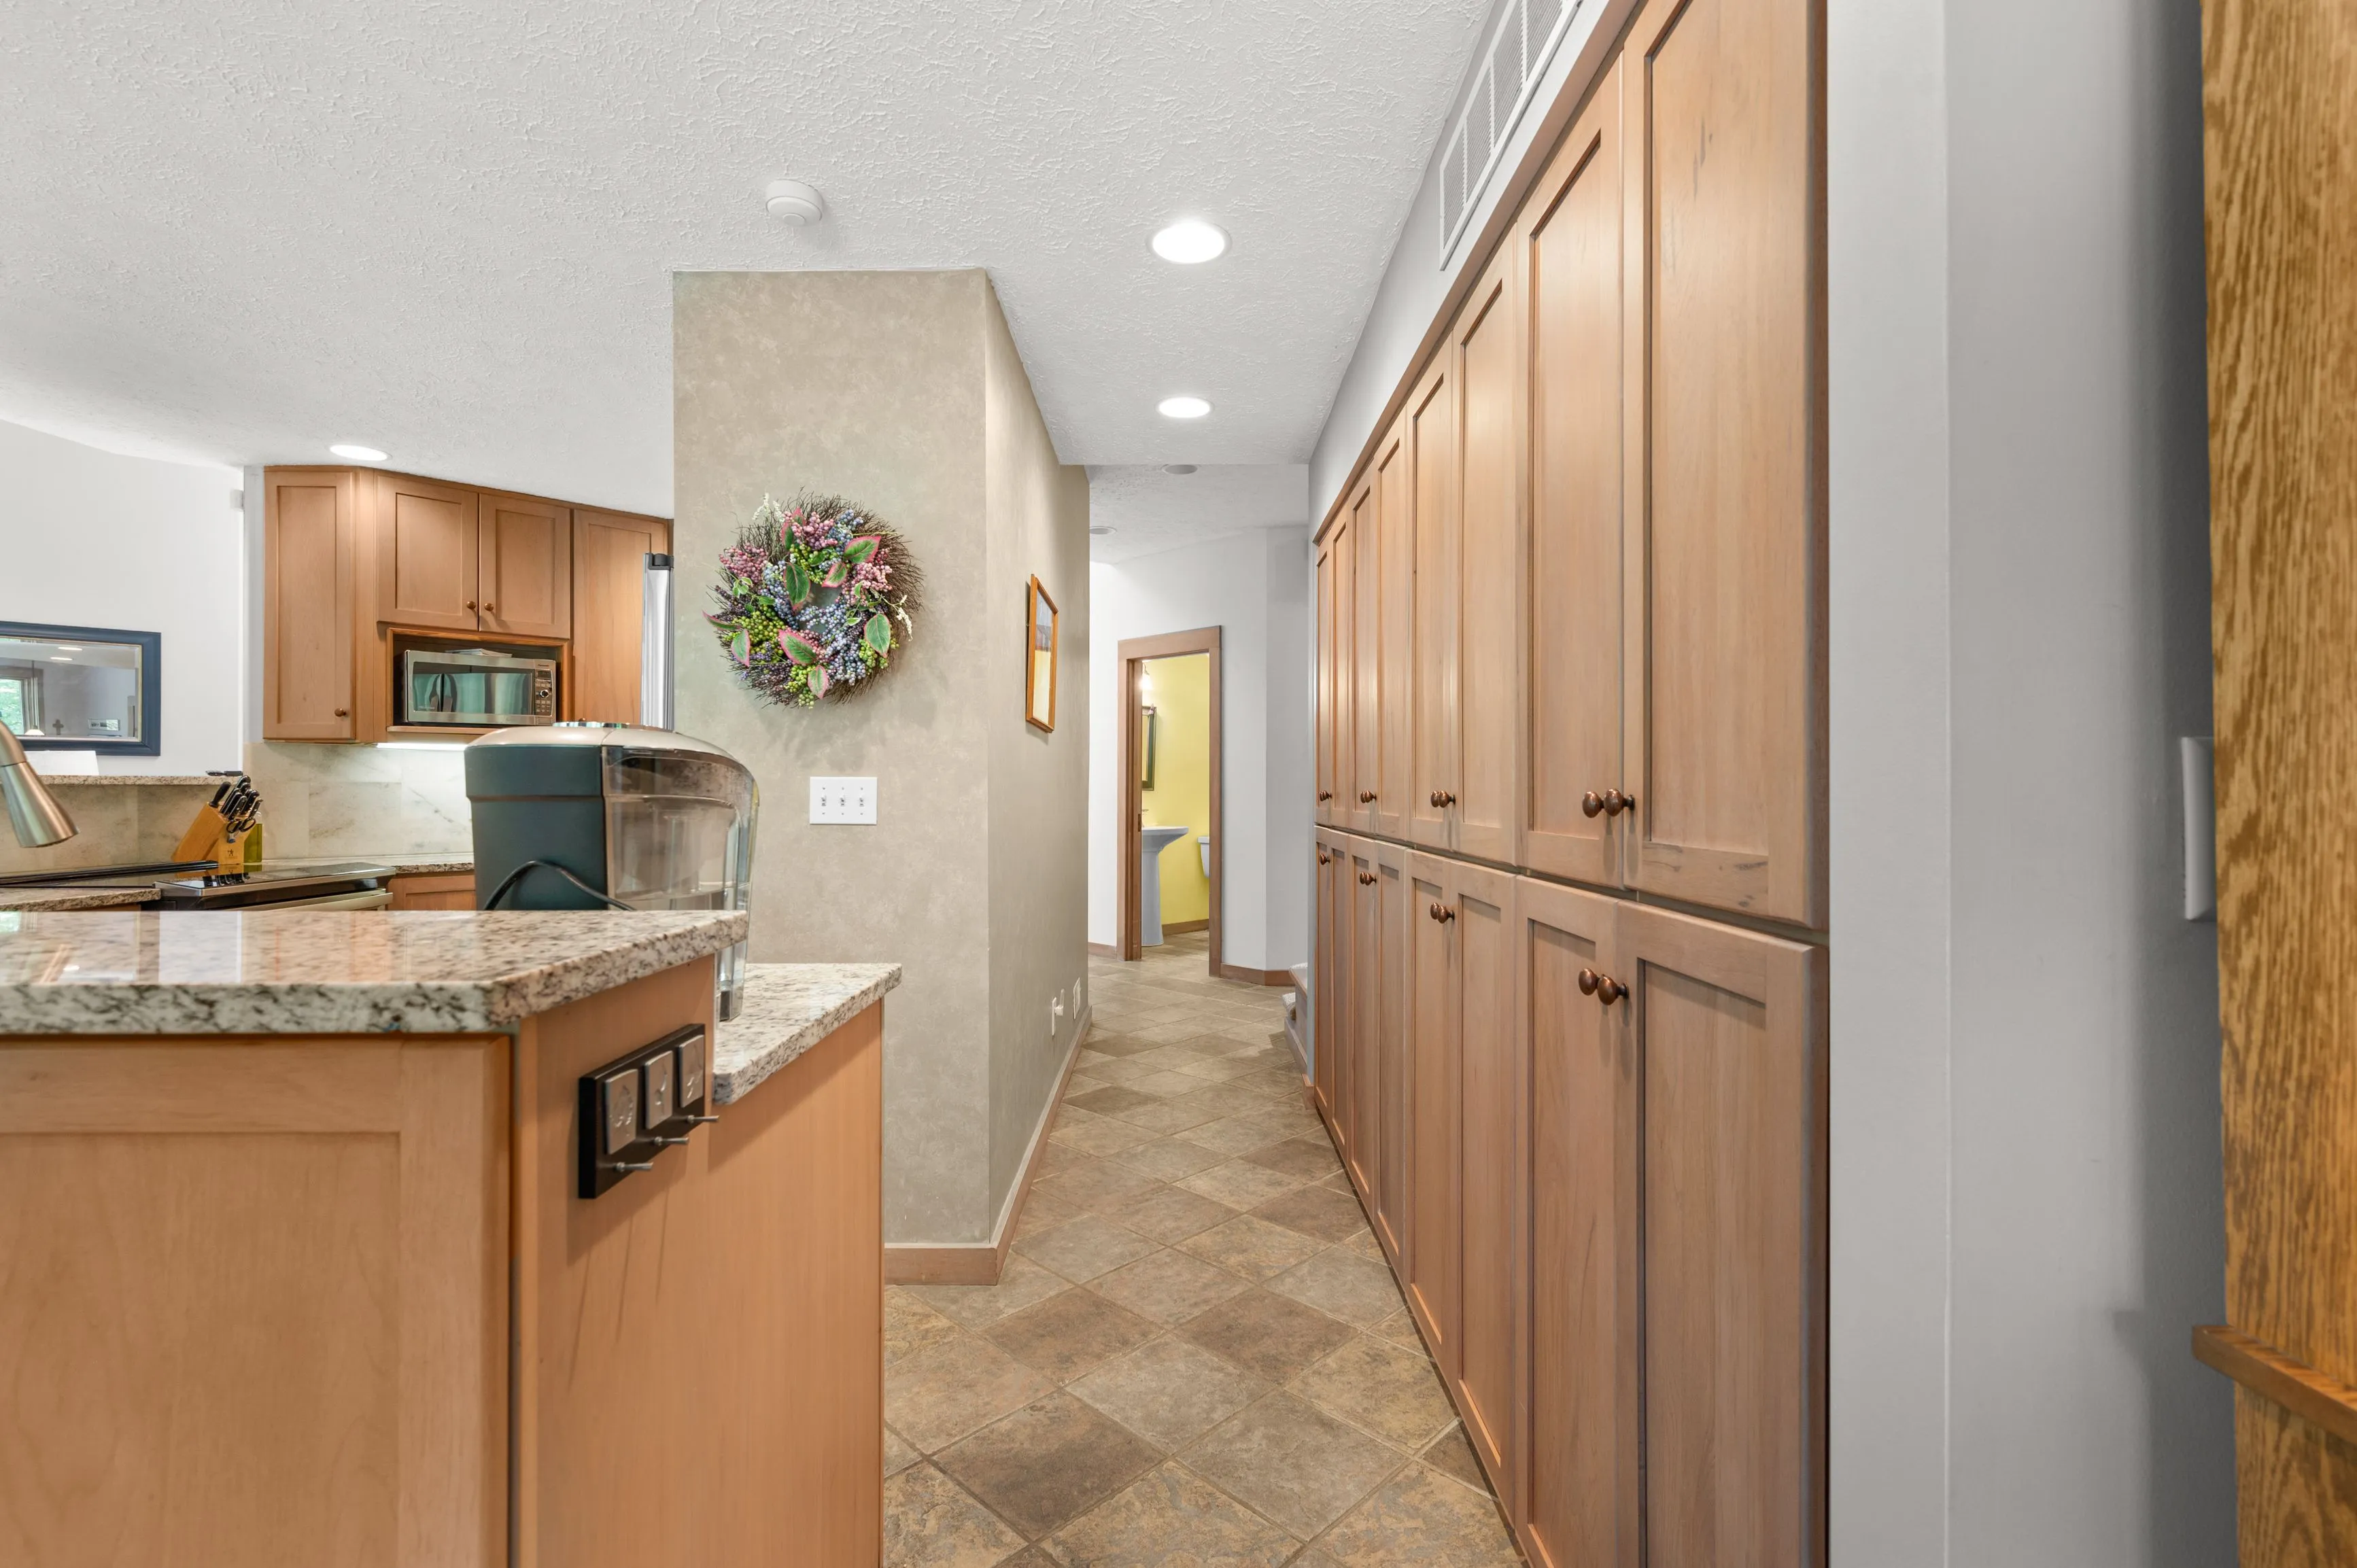 Interior view of a home hallway featuring built-in wood cabinets on the right and a kitchen area with countertops on the left.